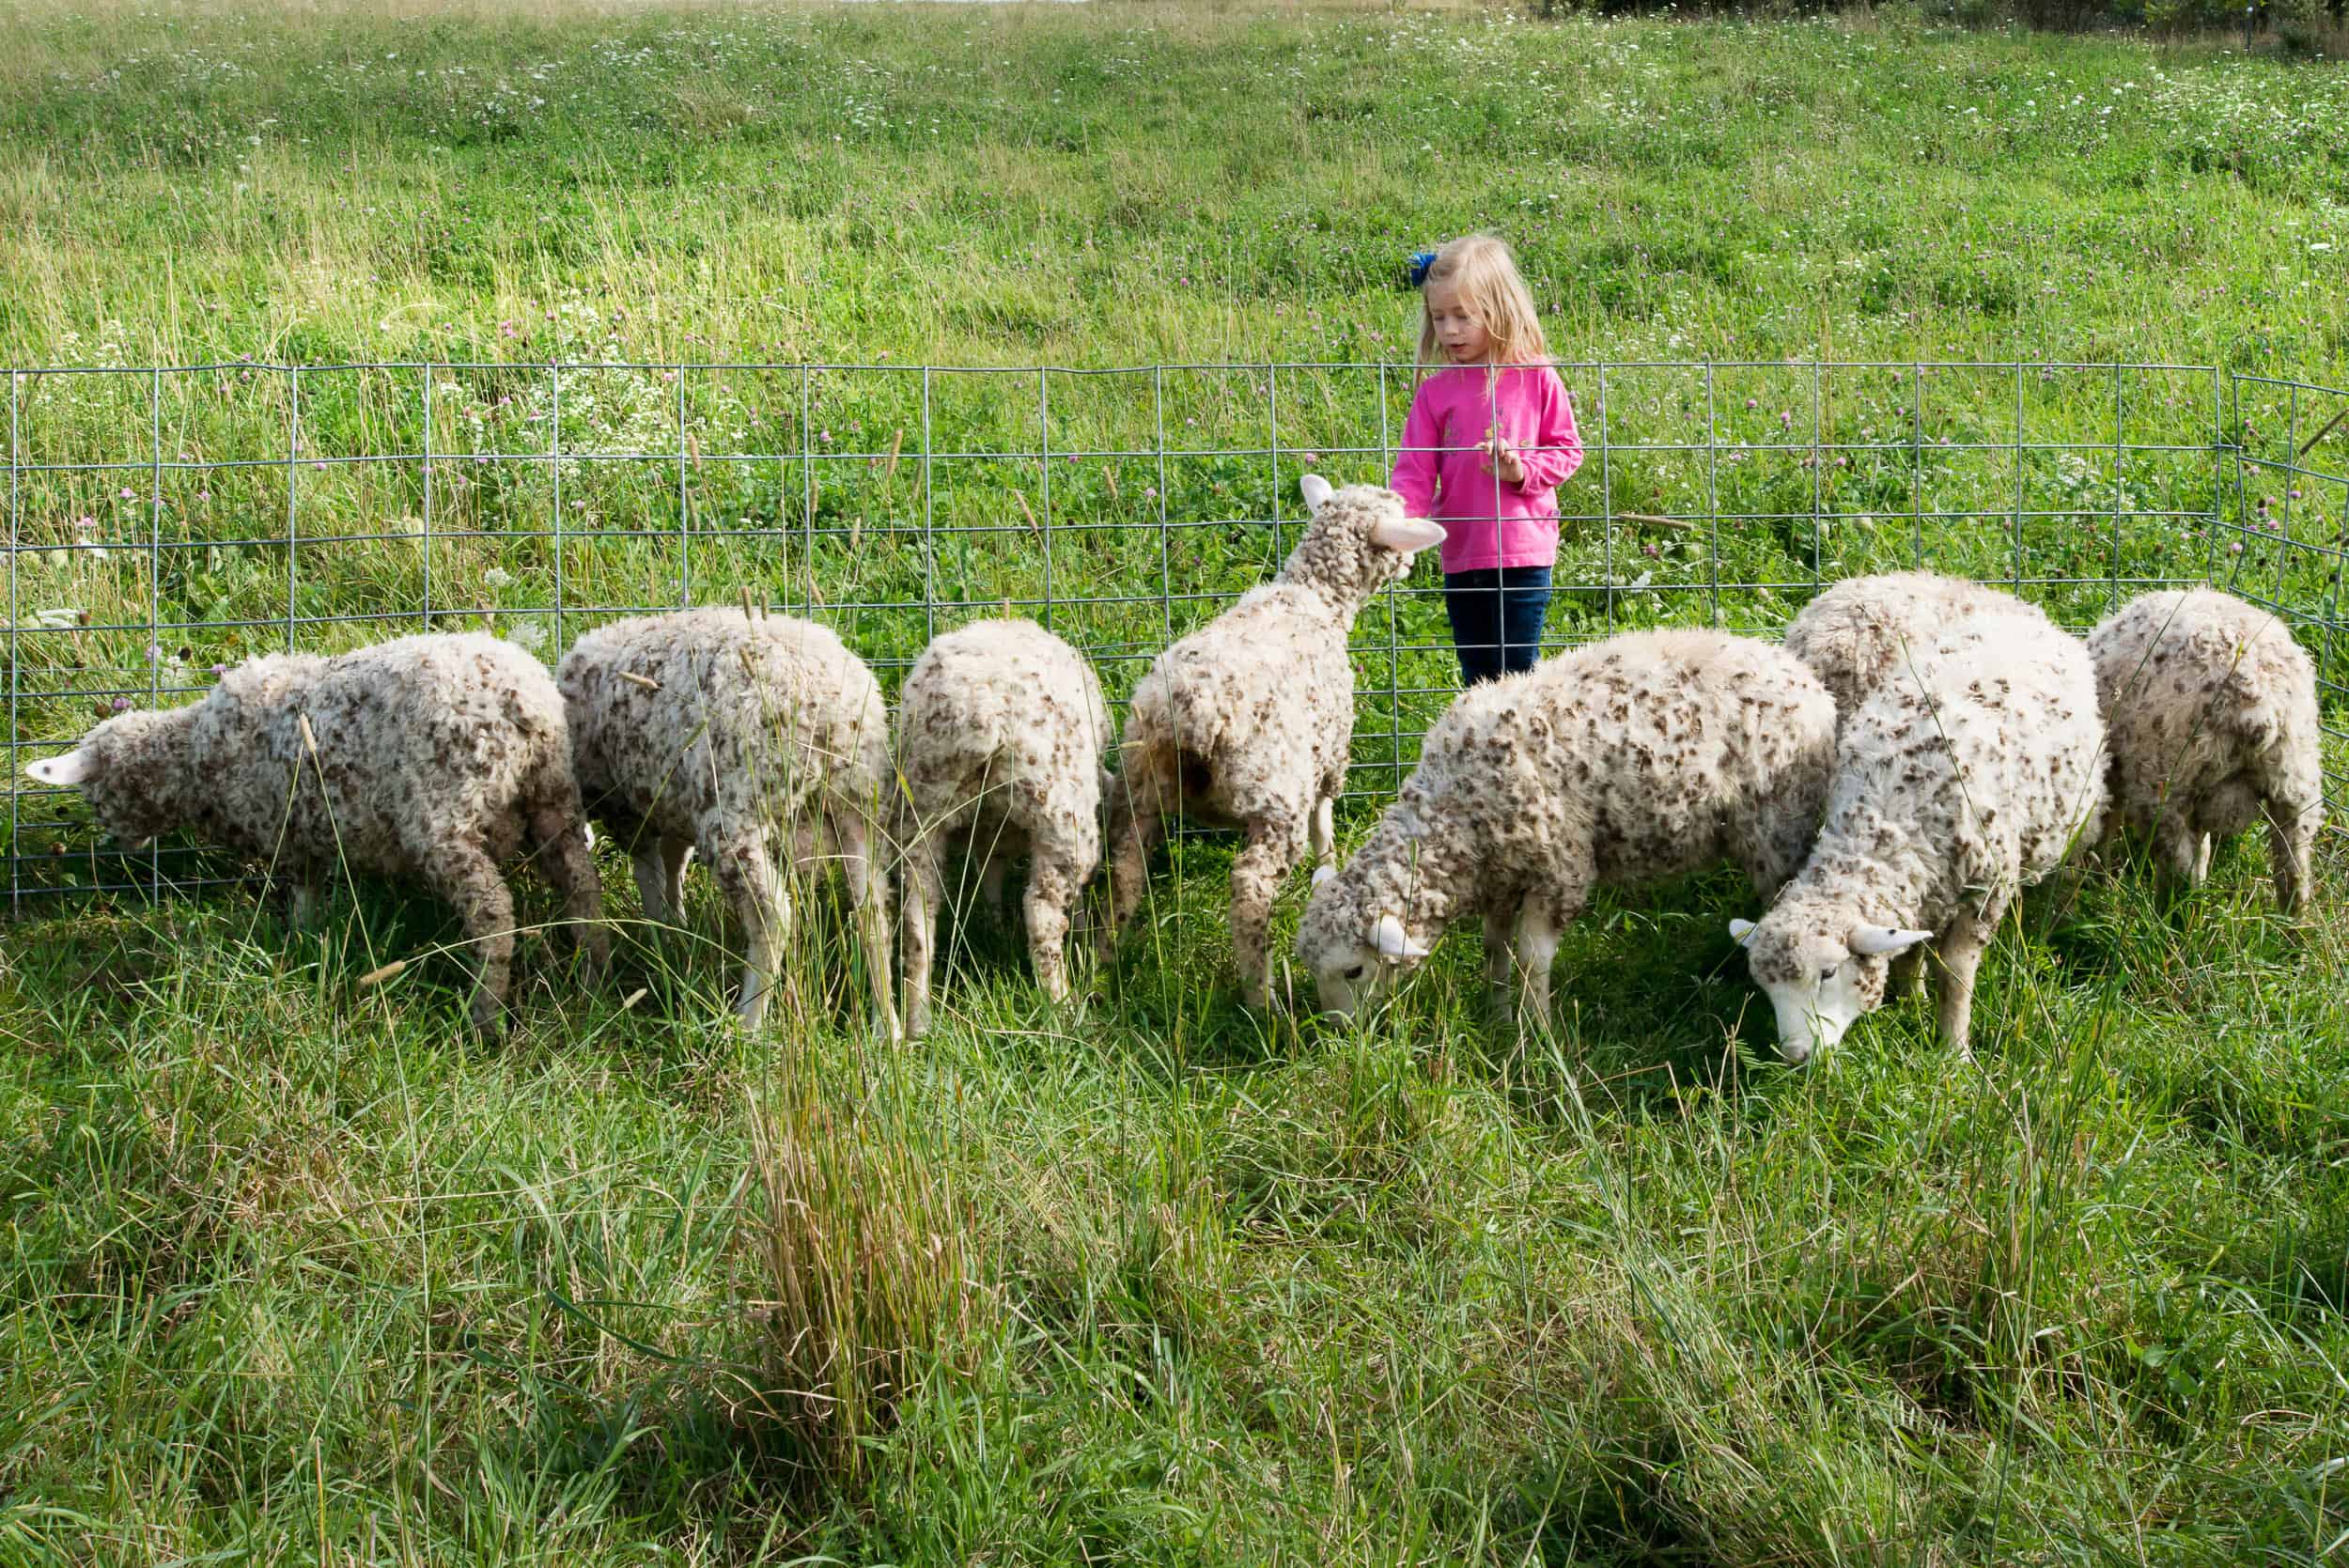 A girl is standing next to a group of sheep.